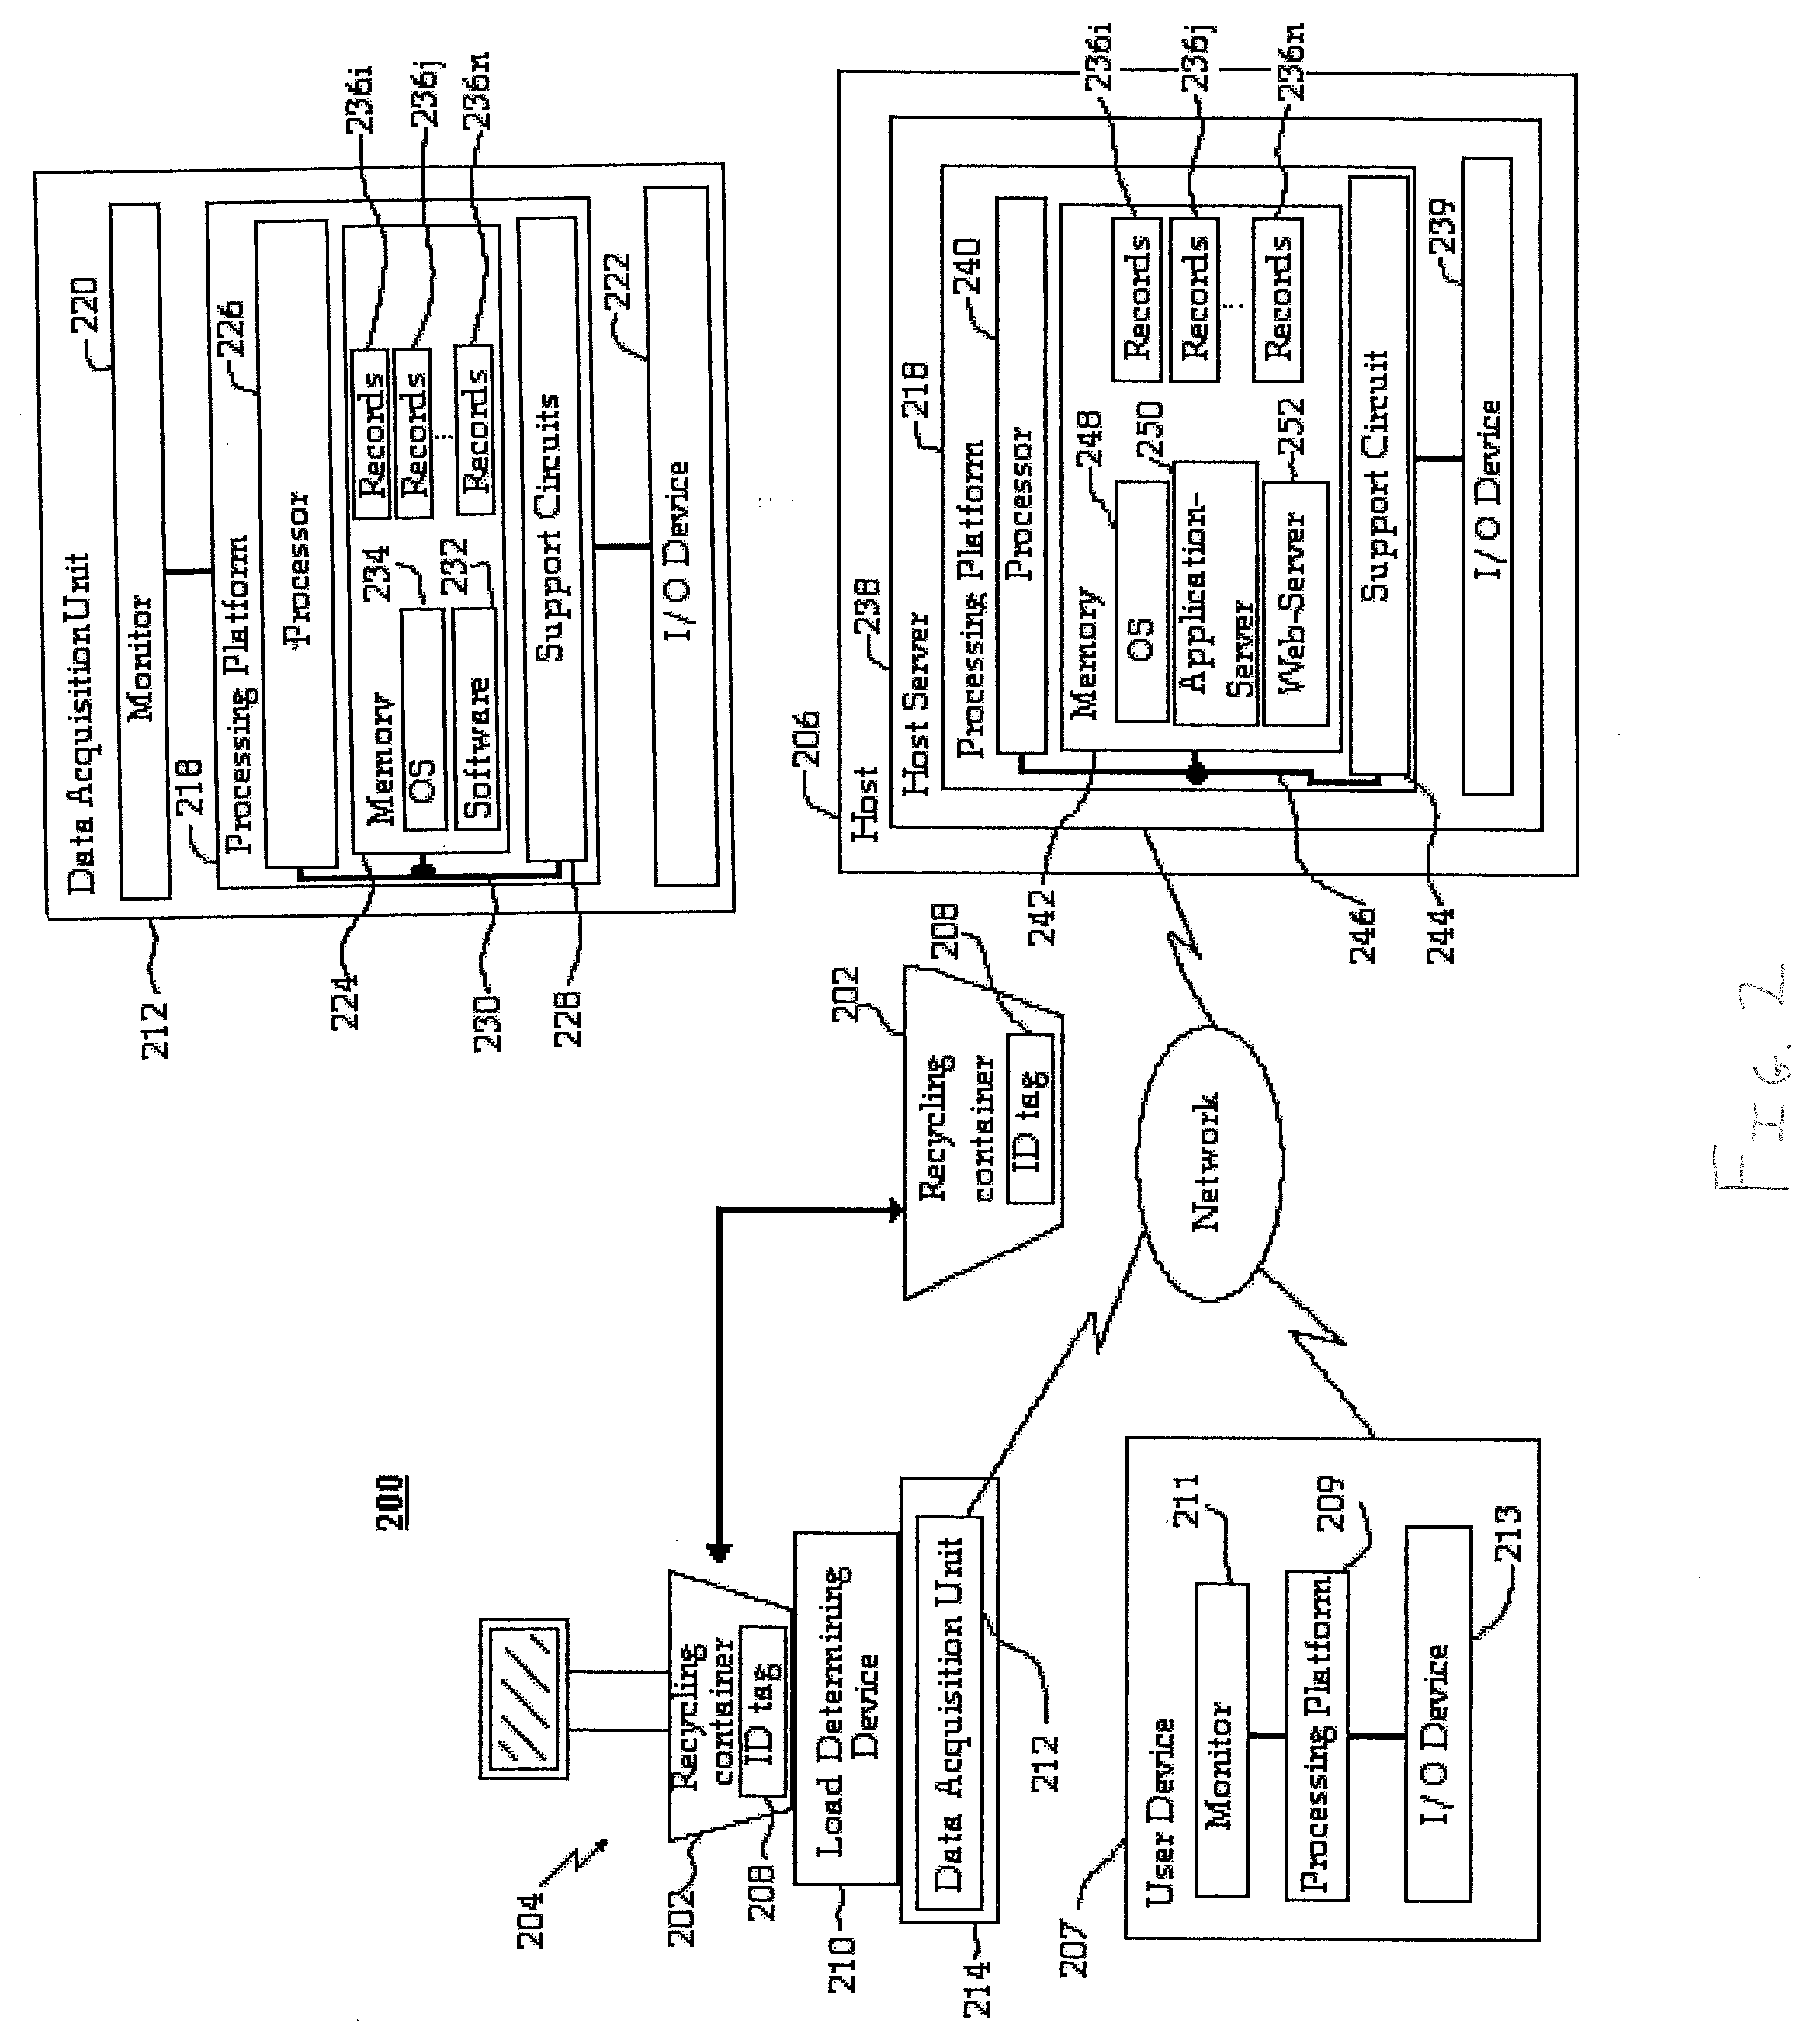 Recycling kiosk system and method thereof